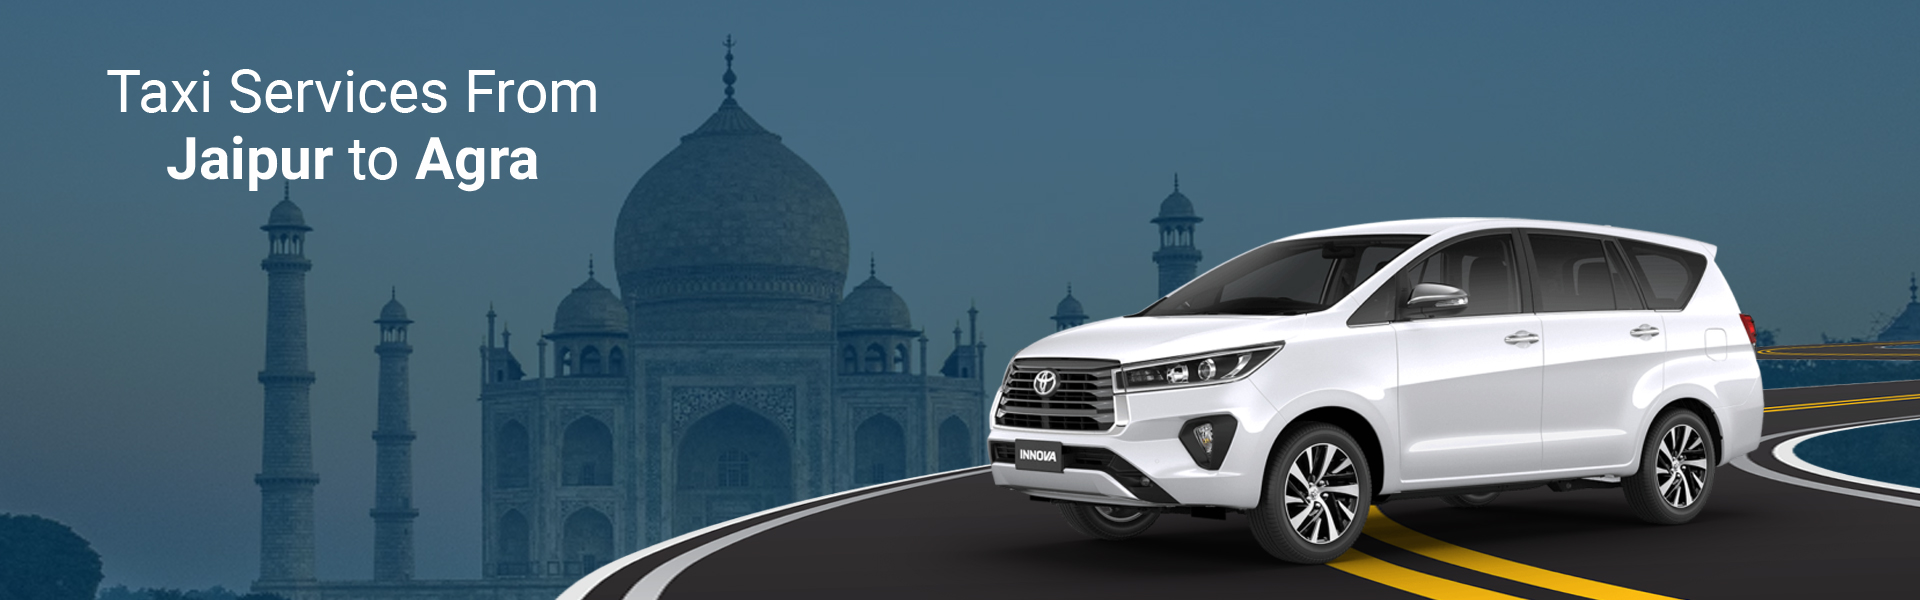 Taxi services from Jaipur to Agra